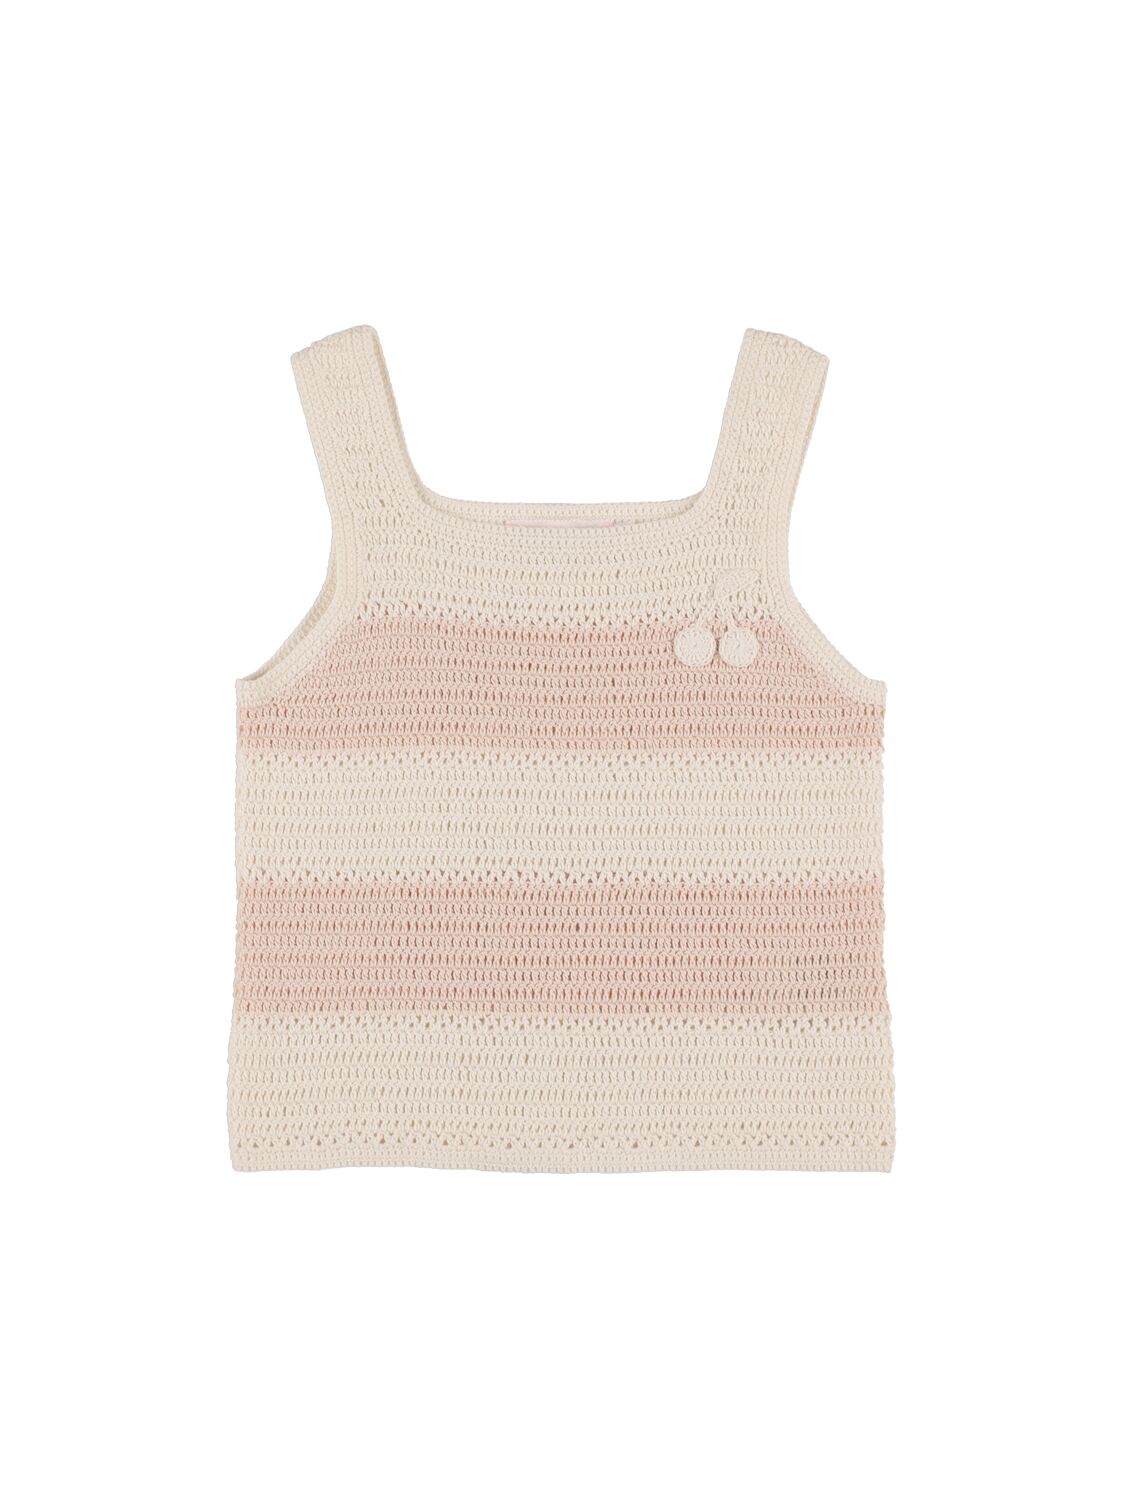 Image of Hand-crocheted Cotton Crop Top